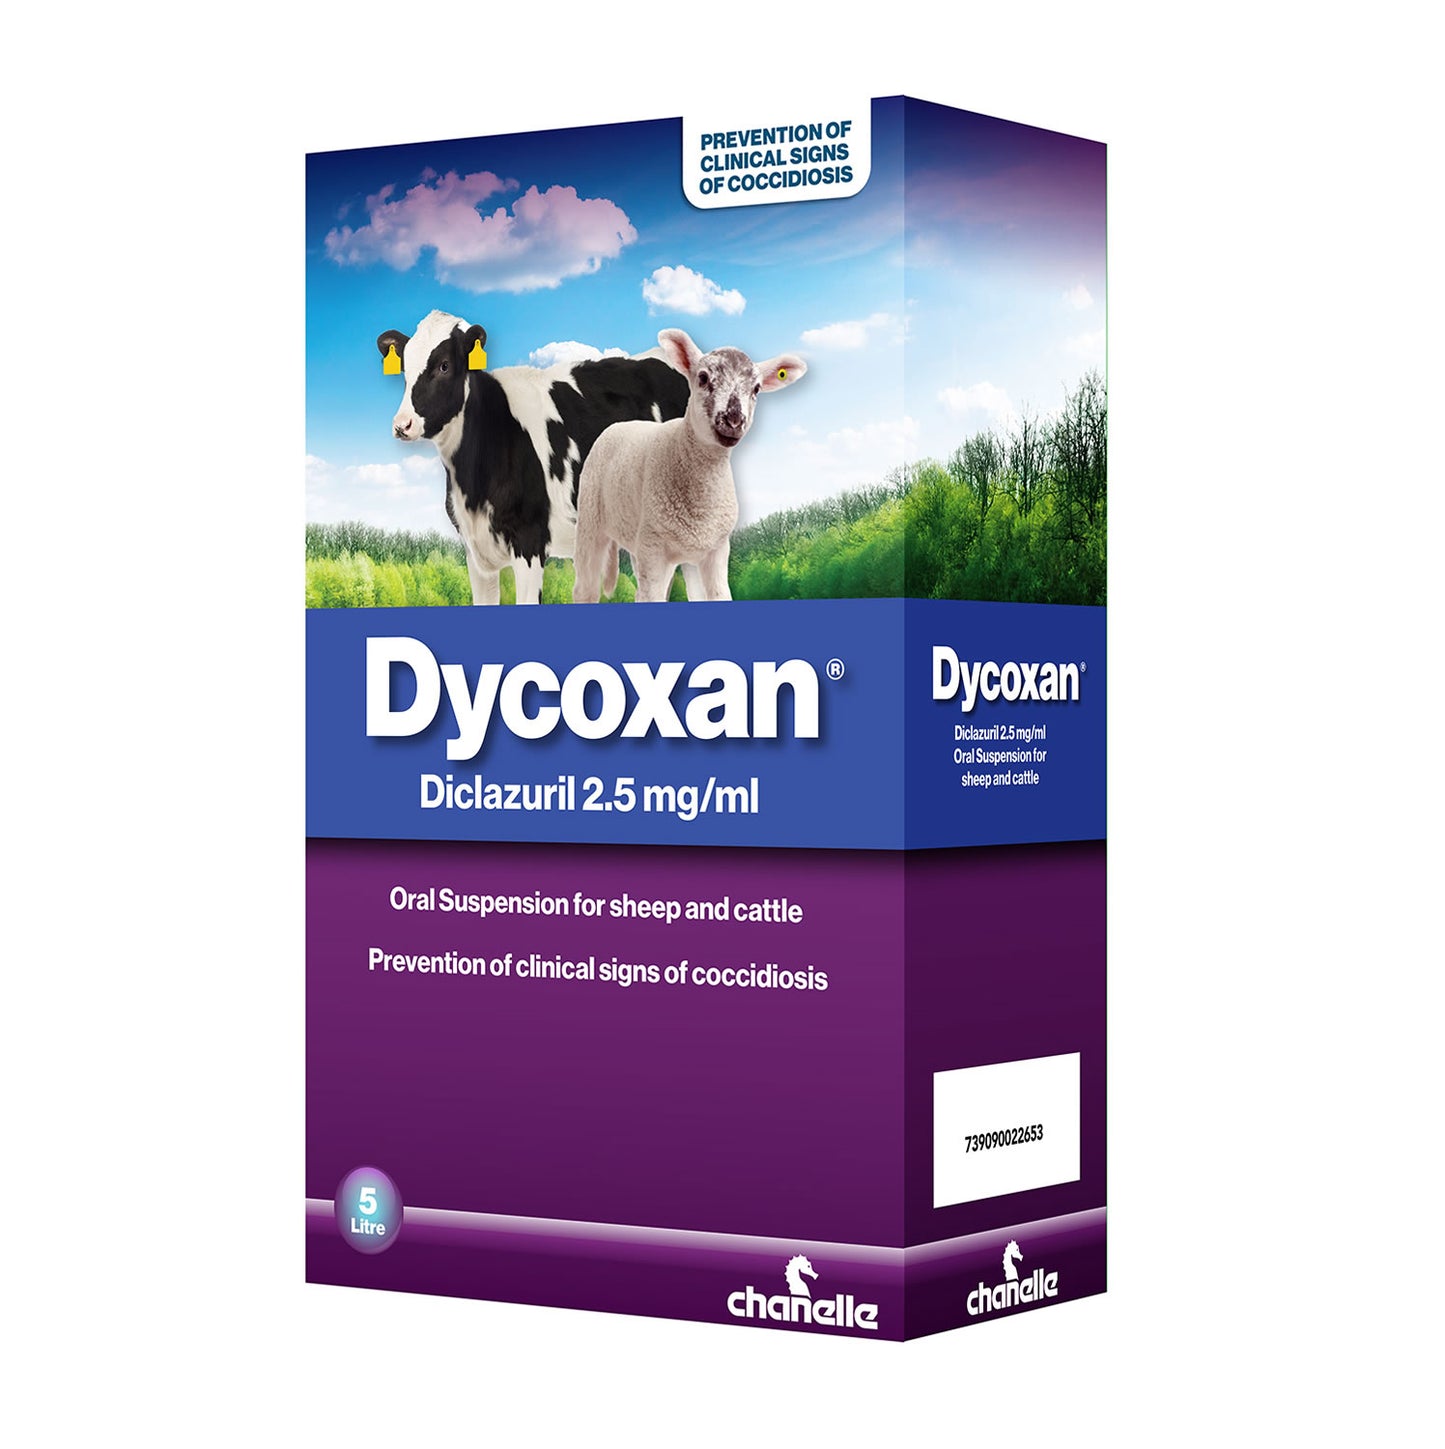 Dycoxan 2.5 mg/ml Oral Suspension for Sheep & Cattle